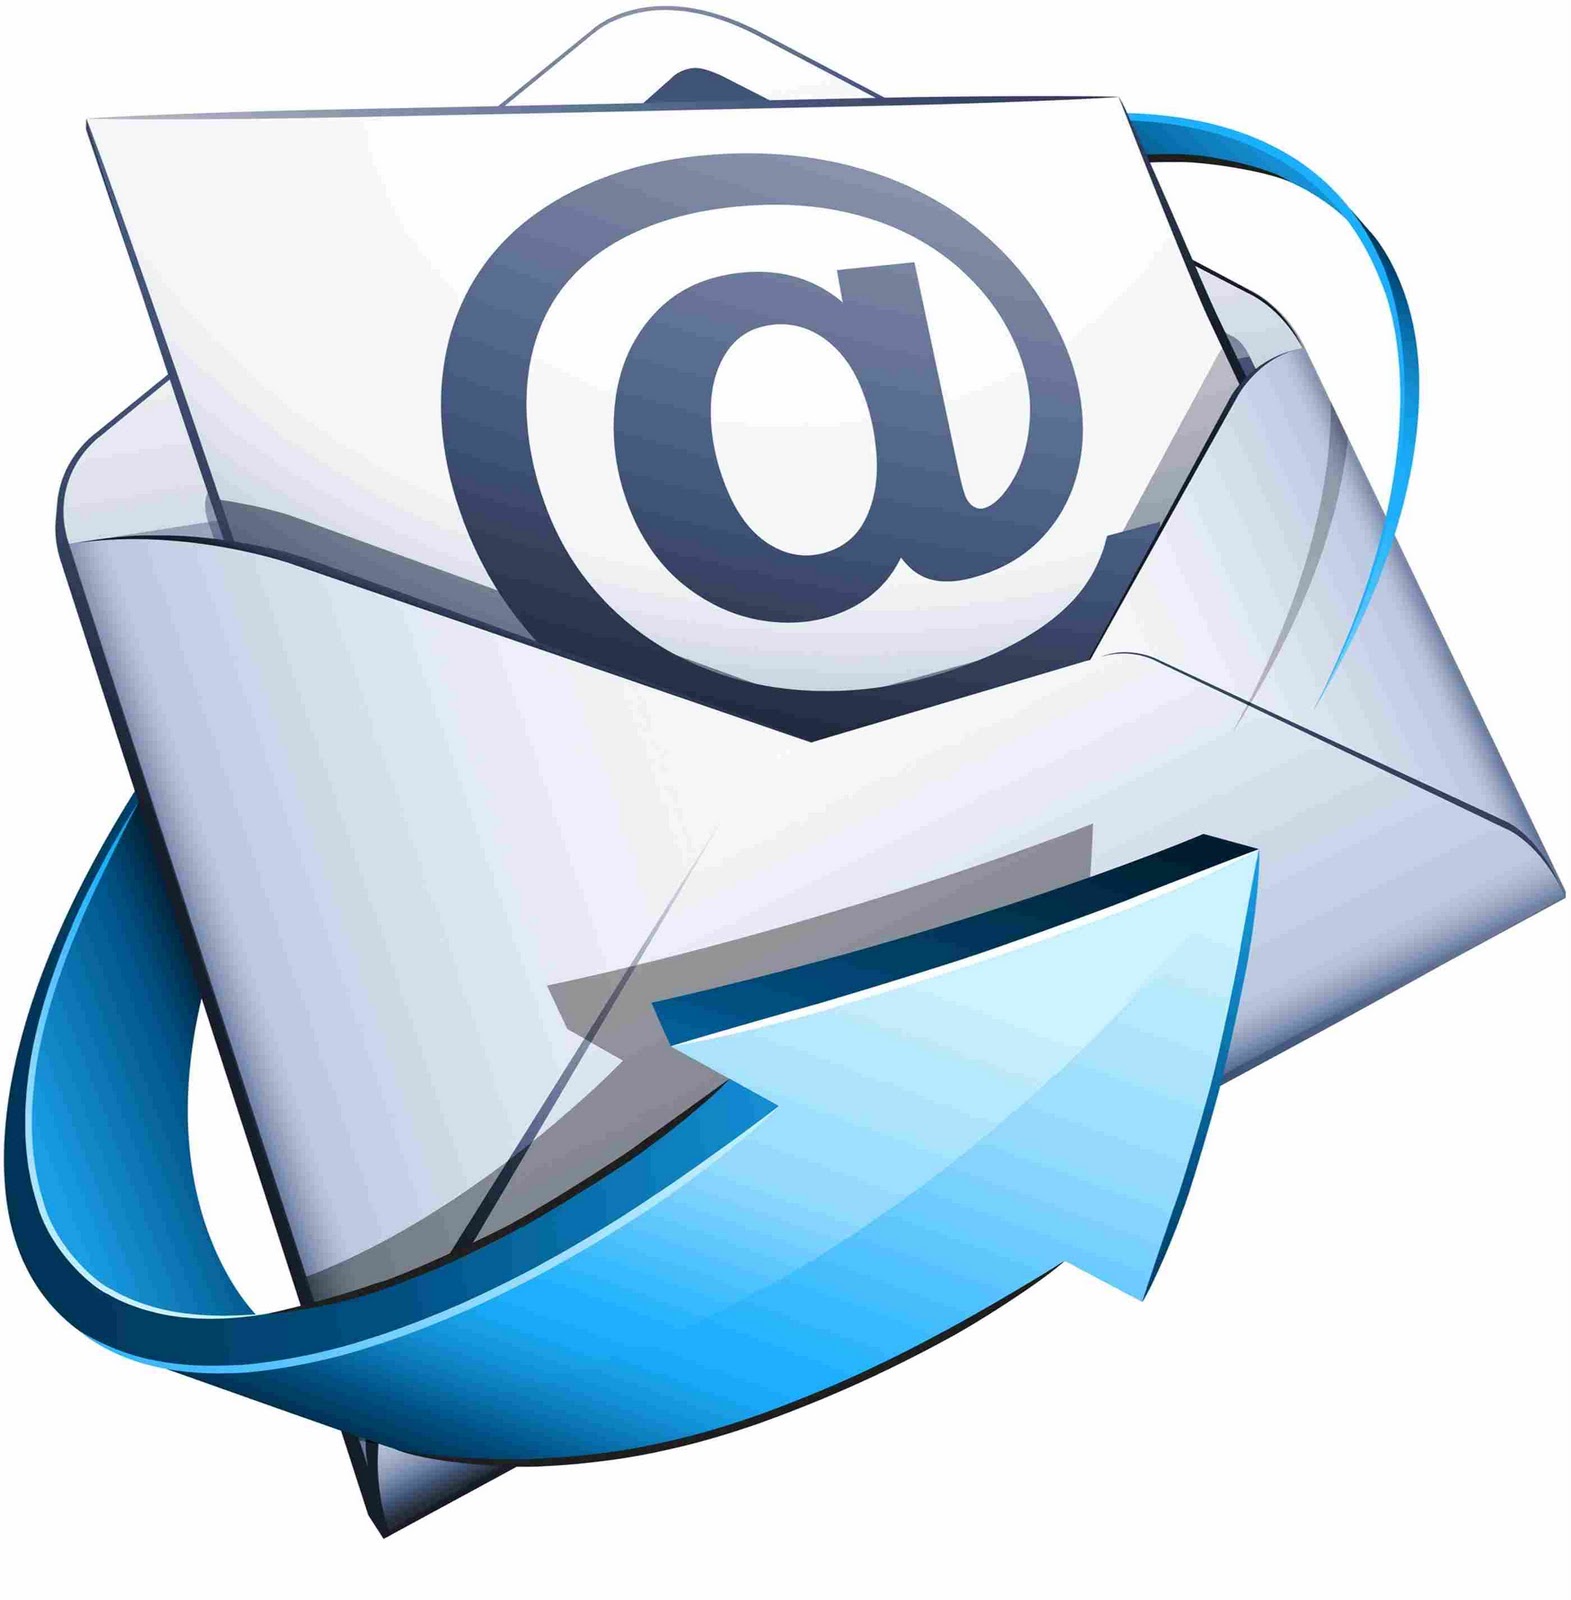 email clipart blue - photo #26